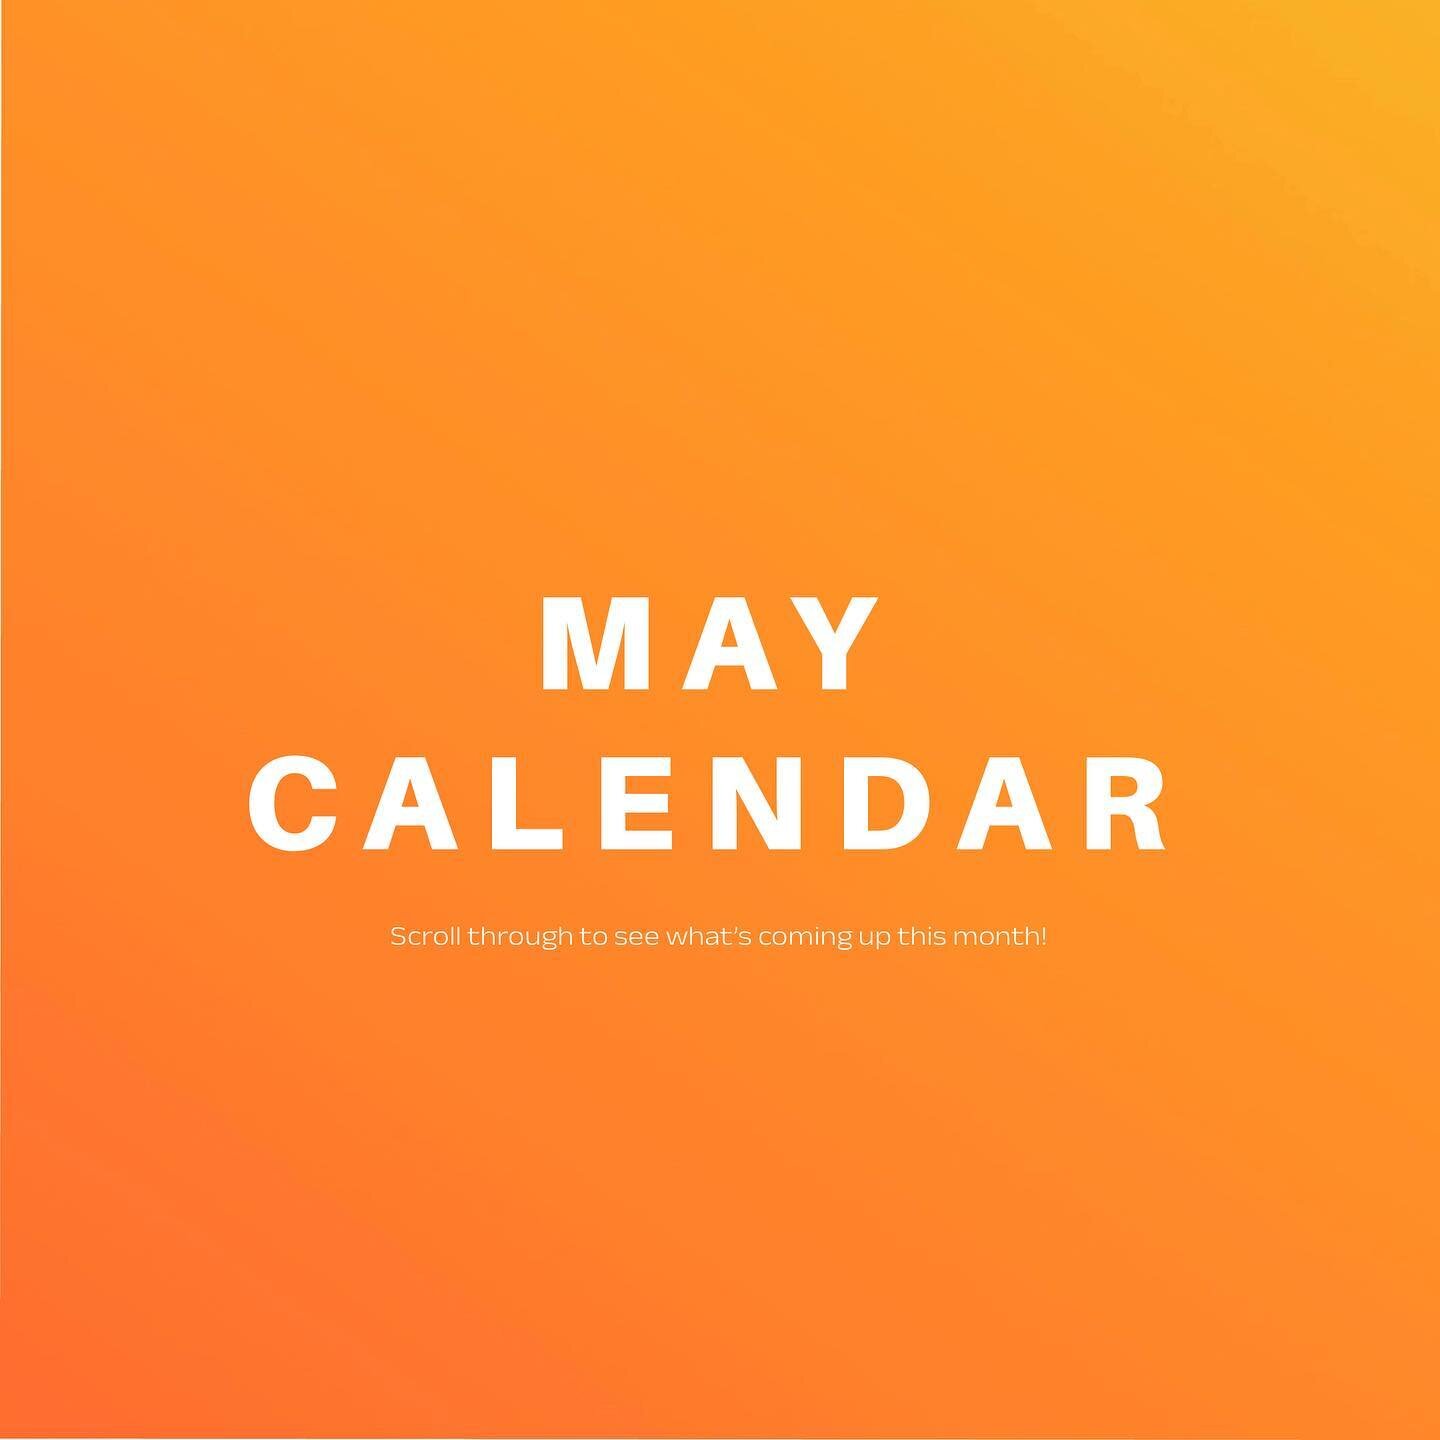 MAY CALENDAR! 

Stoked for the upcoming weeks. What are you most excited for? 

Wednesday the 3rd: PURSUIT NIGHT

Wednesday the 10th: SQUAD NIGHT (Glow Dodgeball Edition) 

Wednesday the 17th: T-TIME x SMALL GROUPS 

Wednesday the 24th: MIDS ONLY Par